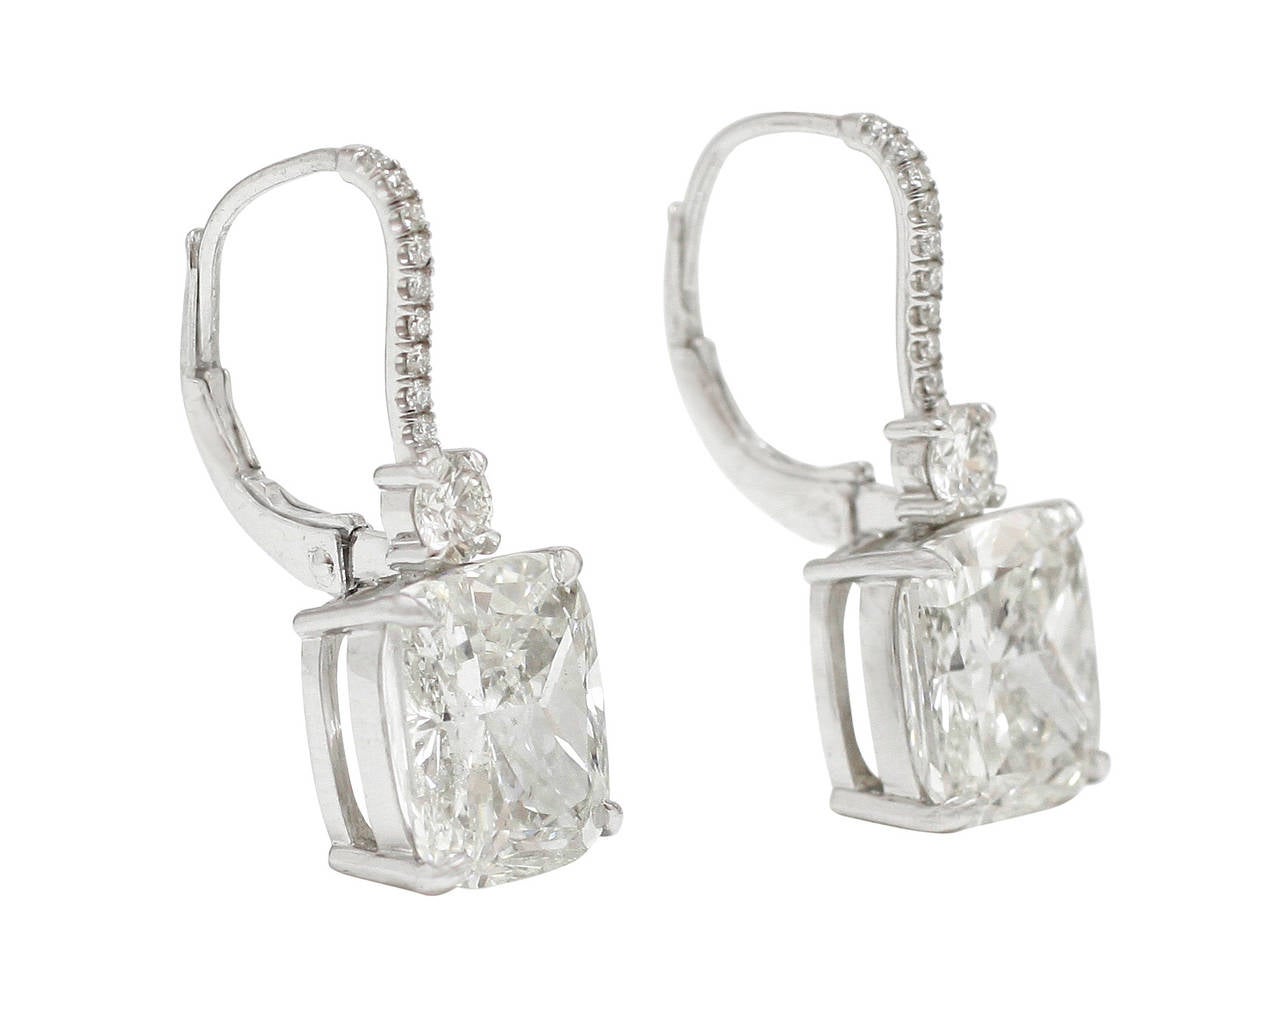 Burdeen's Phenomenal Cushion Diamond Platinum Hanging Earrings In New Condition For Sale In Buffalo Grove, IL